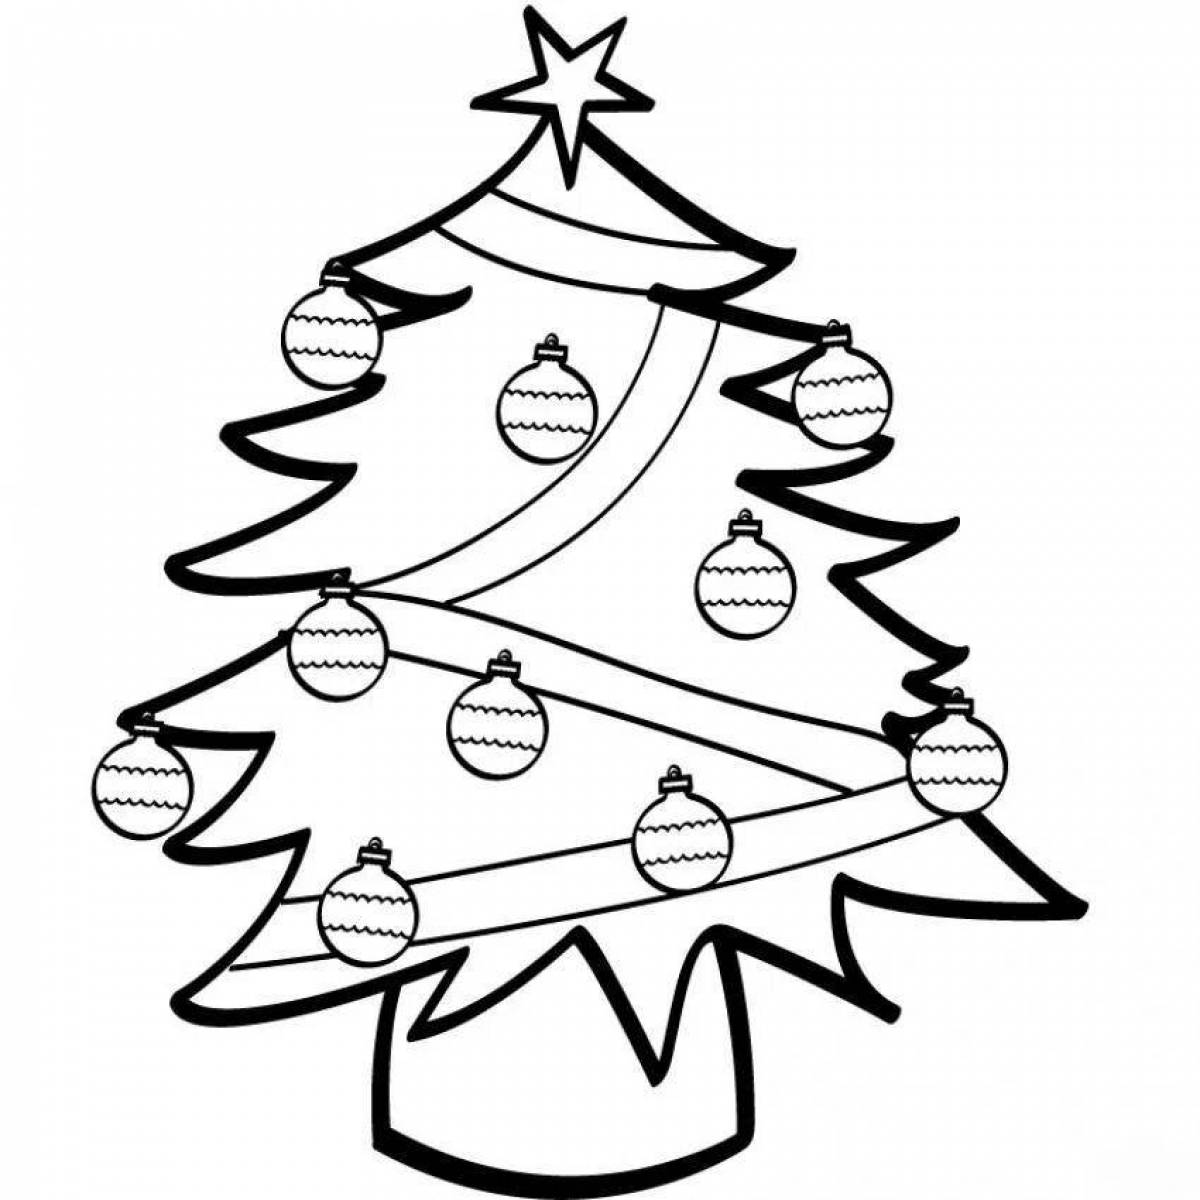 Coloring page of an elaborately decorated Christmas tree